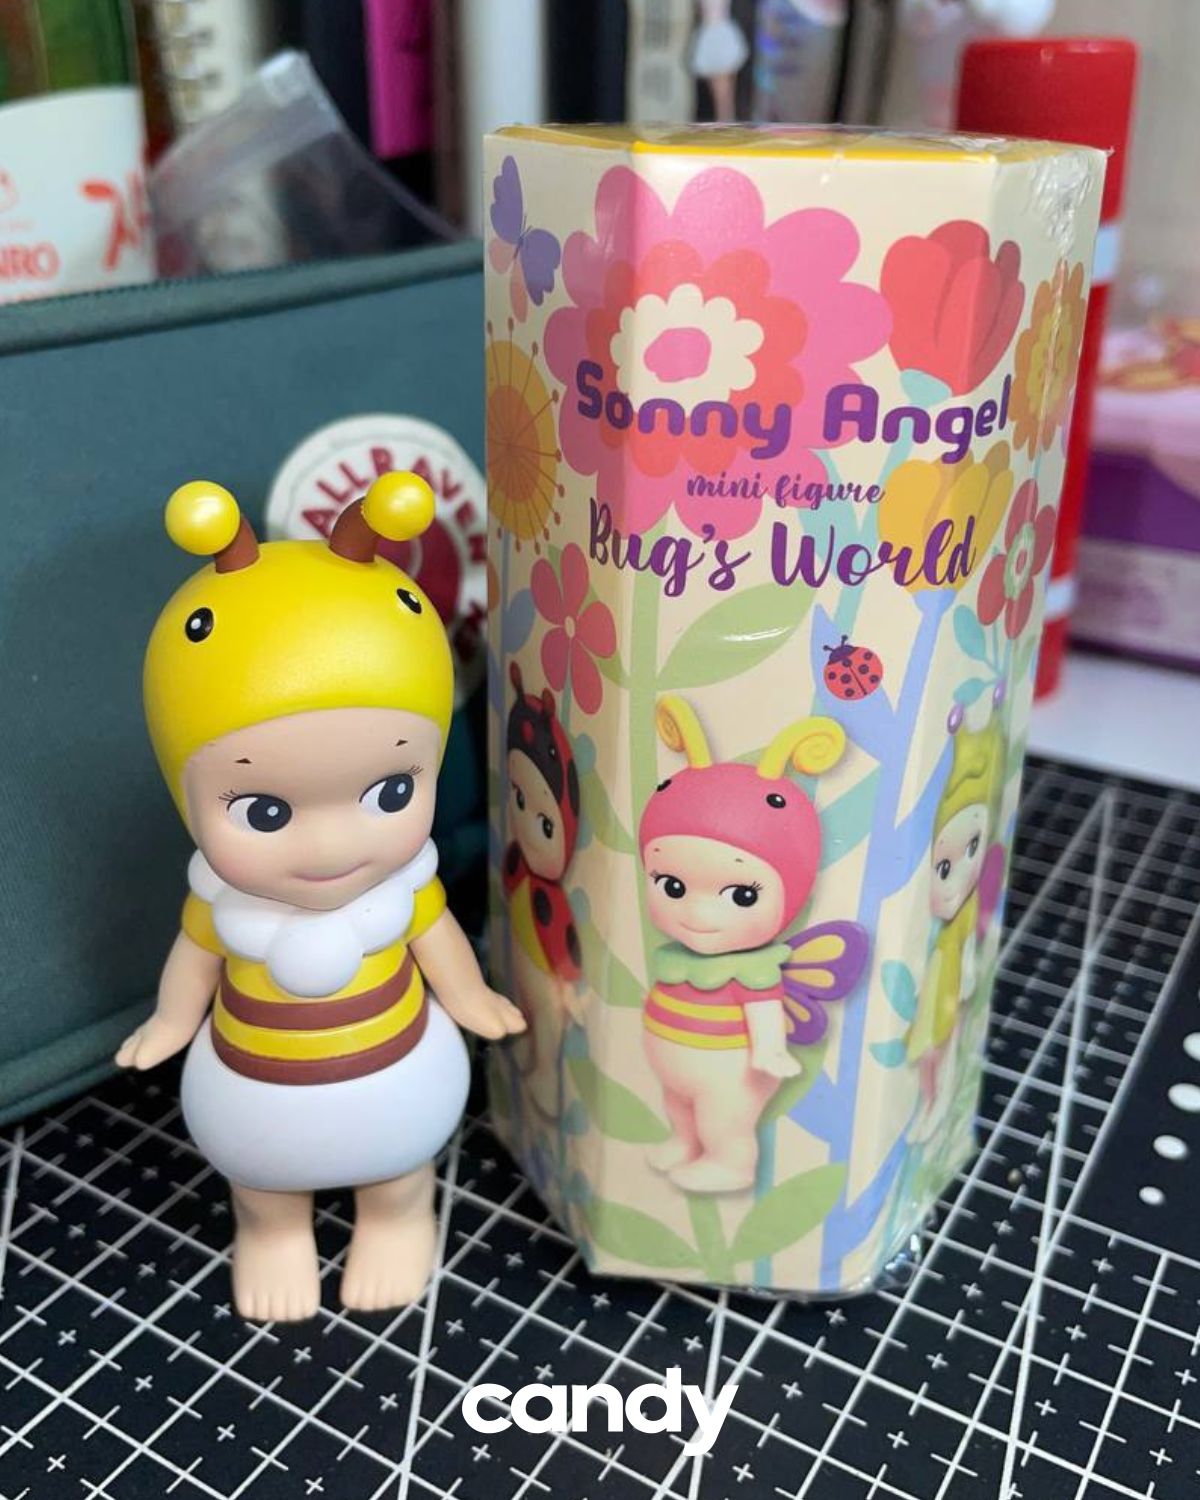 Sonny Angel Philippines: Where to Buy Them, Price